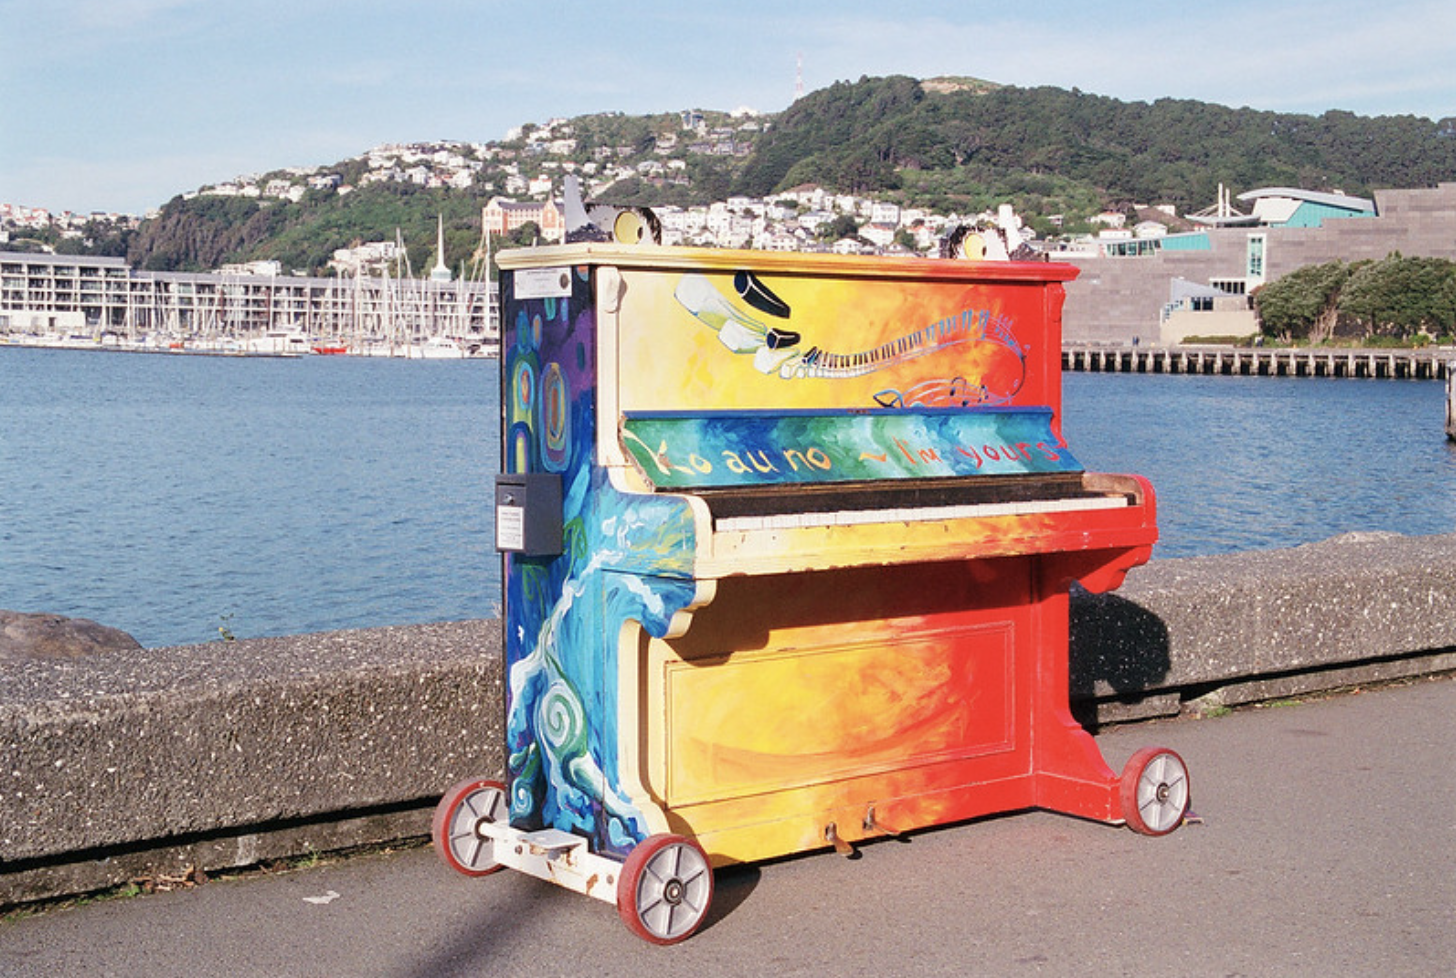 Anyone can walk up to and play this piano on a pier in Wellington, New Zealand, the world's third happiest city, August 2, 2019 (Photo by N.J. Cull) Creative Commons license via Flickr